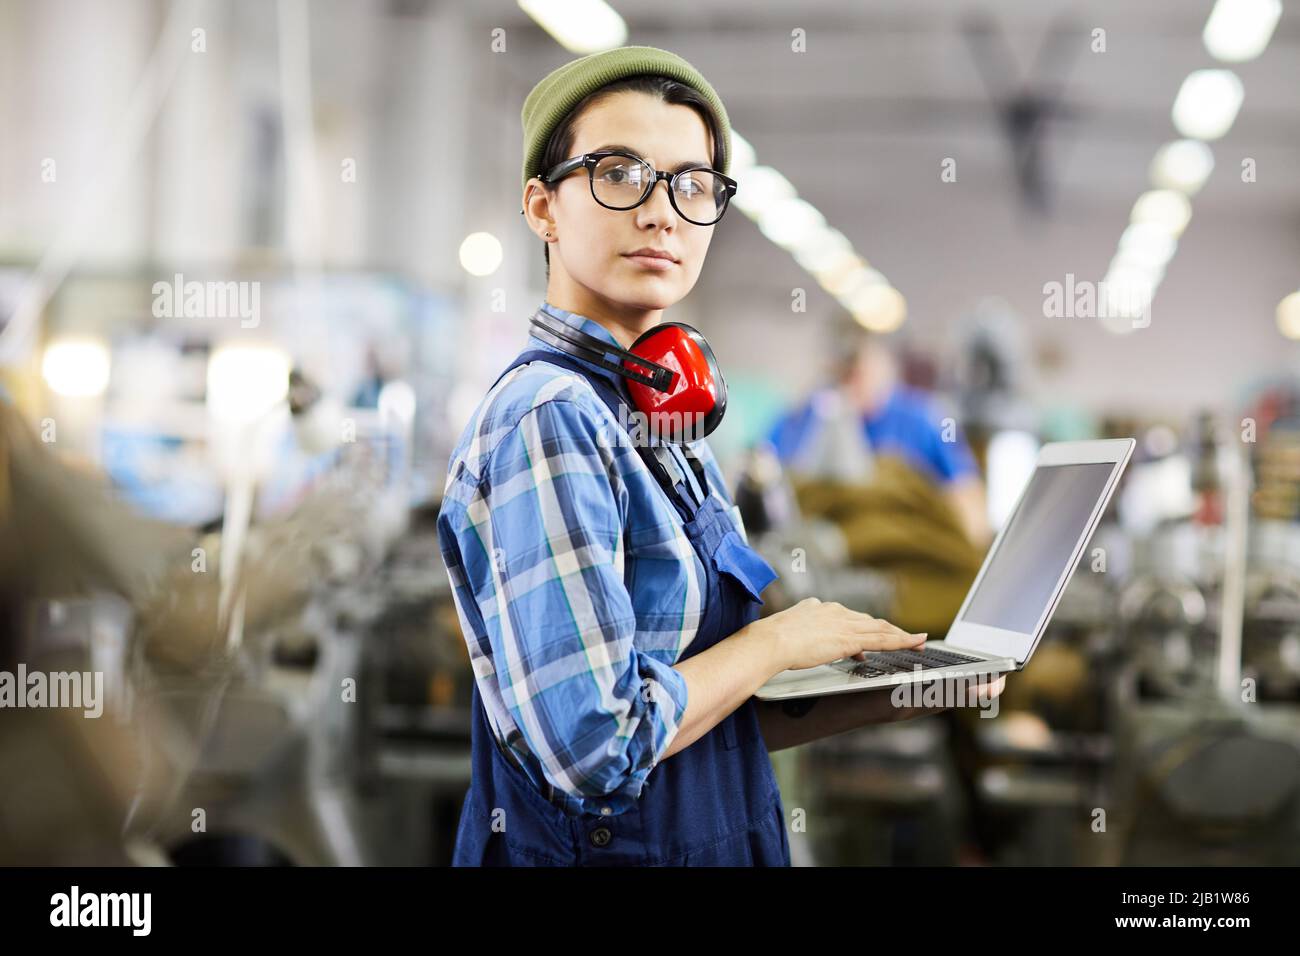 Serious confident female engineer in beanie hat and eyeglasses standing in industrial shop and using laptop while looking at camera, woman in industry Stock Photo